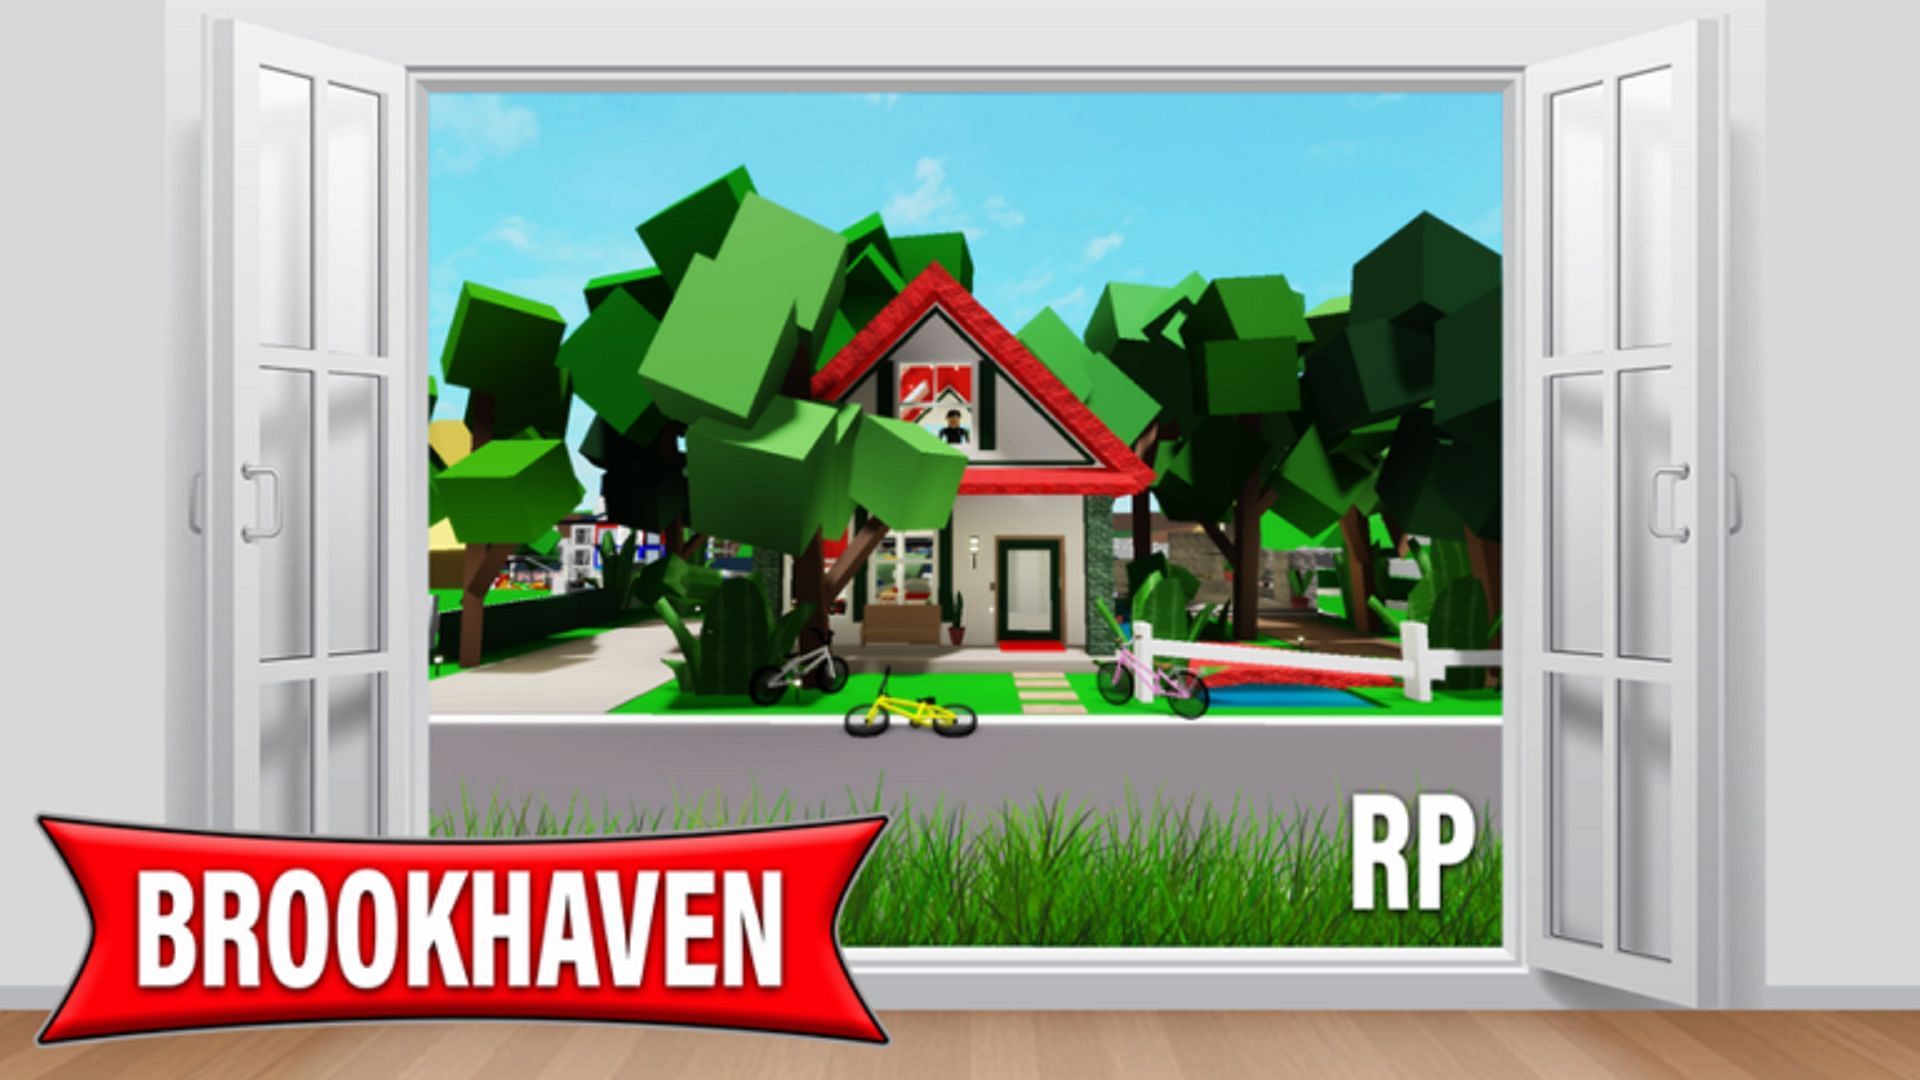 New codes came to Brookhaven (Image via Roblox)